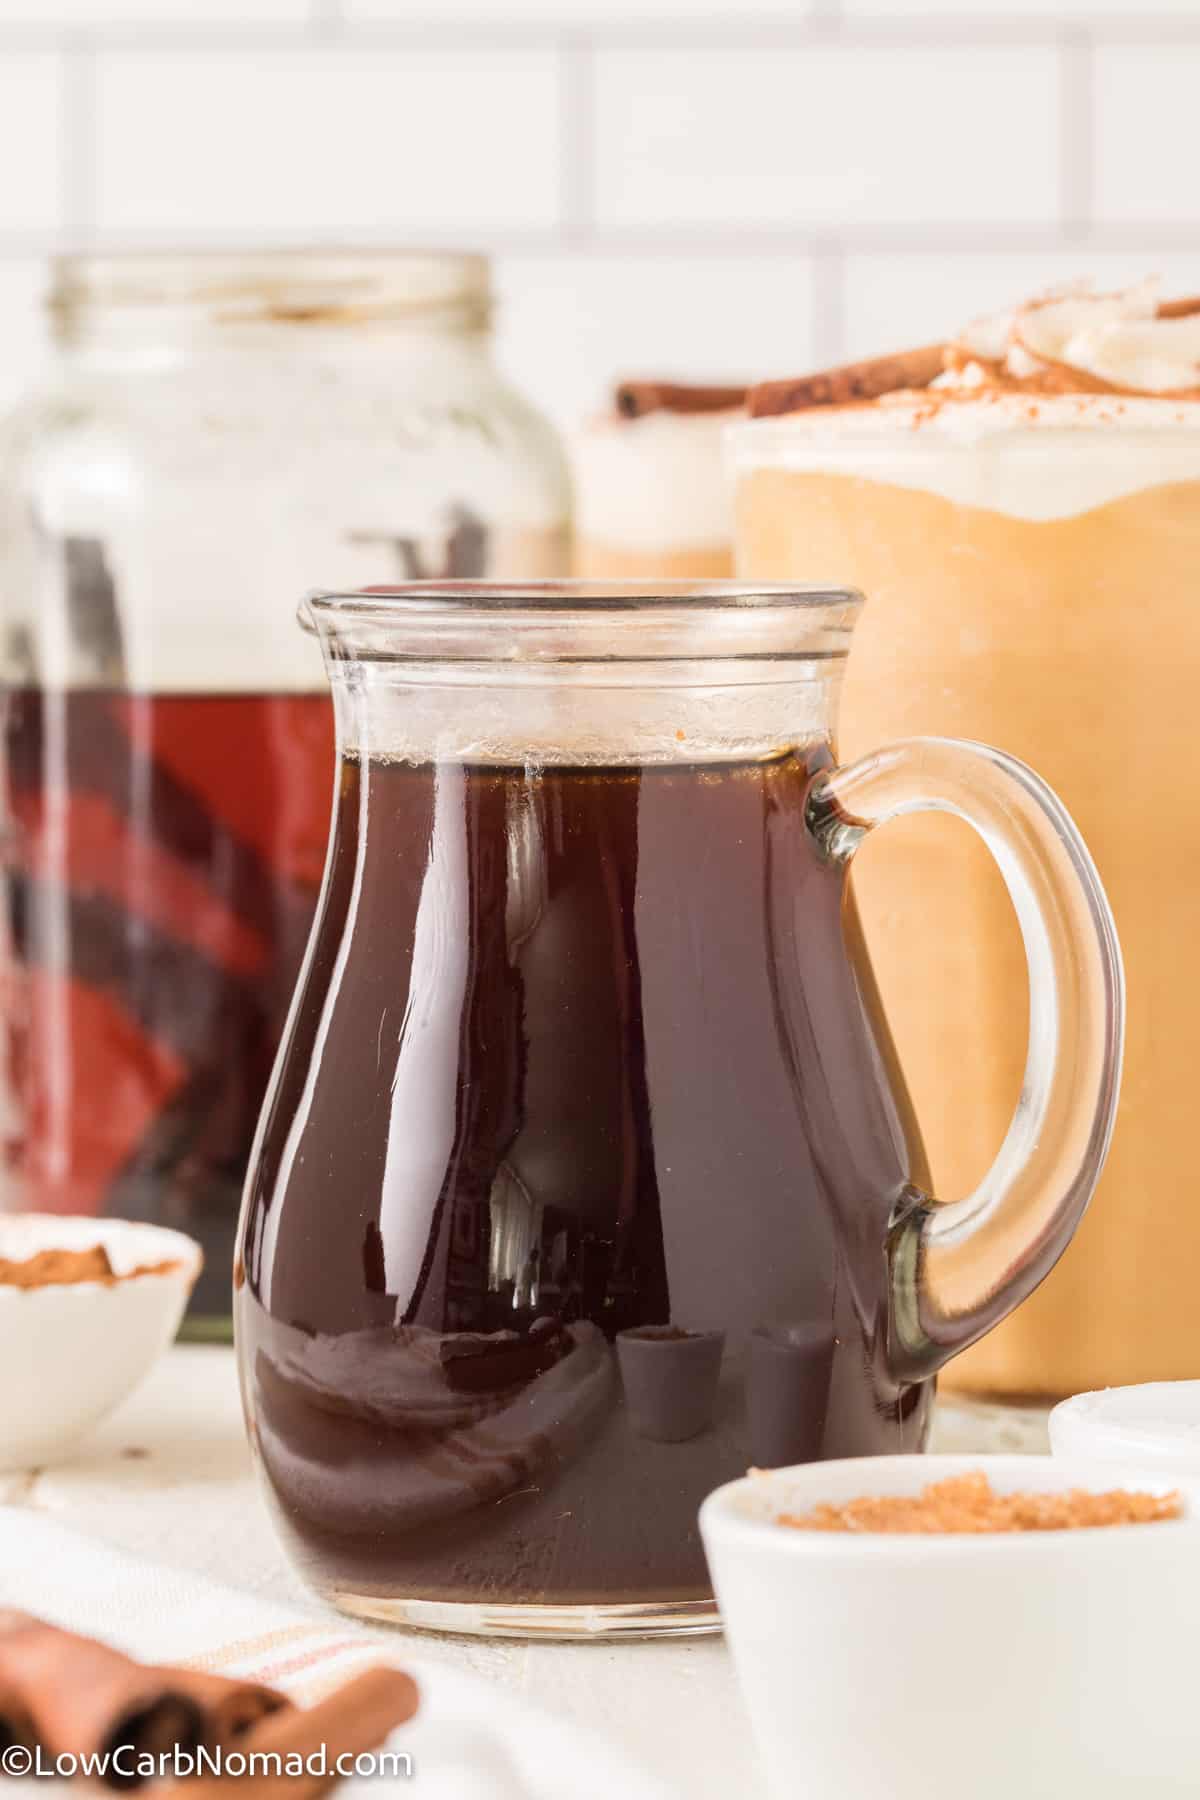 https://www.lowcarbnomad.com/wp-content/uploads/2022/10/Sugar-Free-Cinnamon-Dolce-Syrup-Recipe-18.jpg